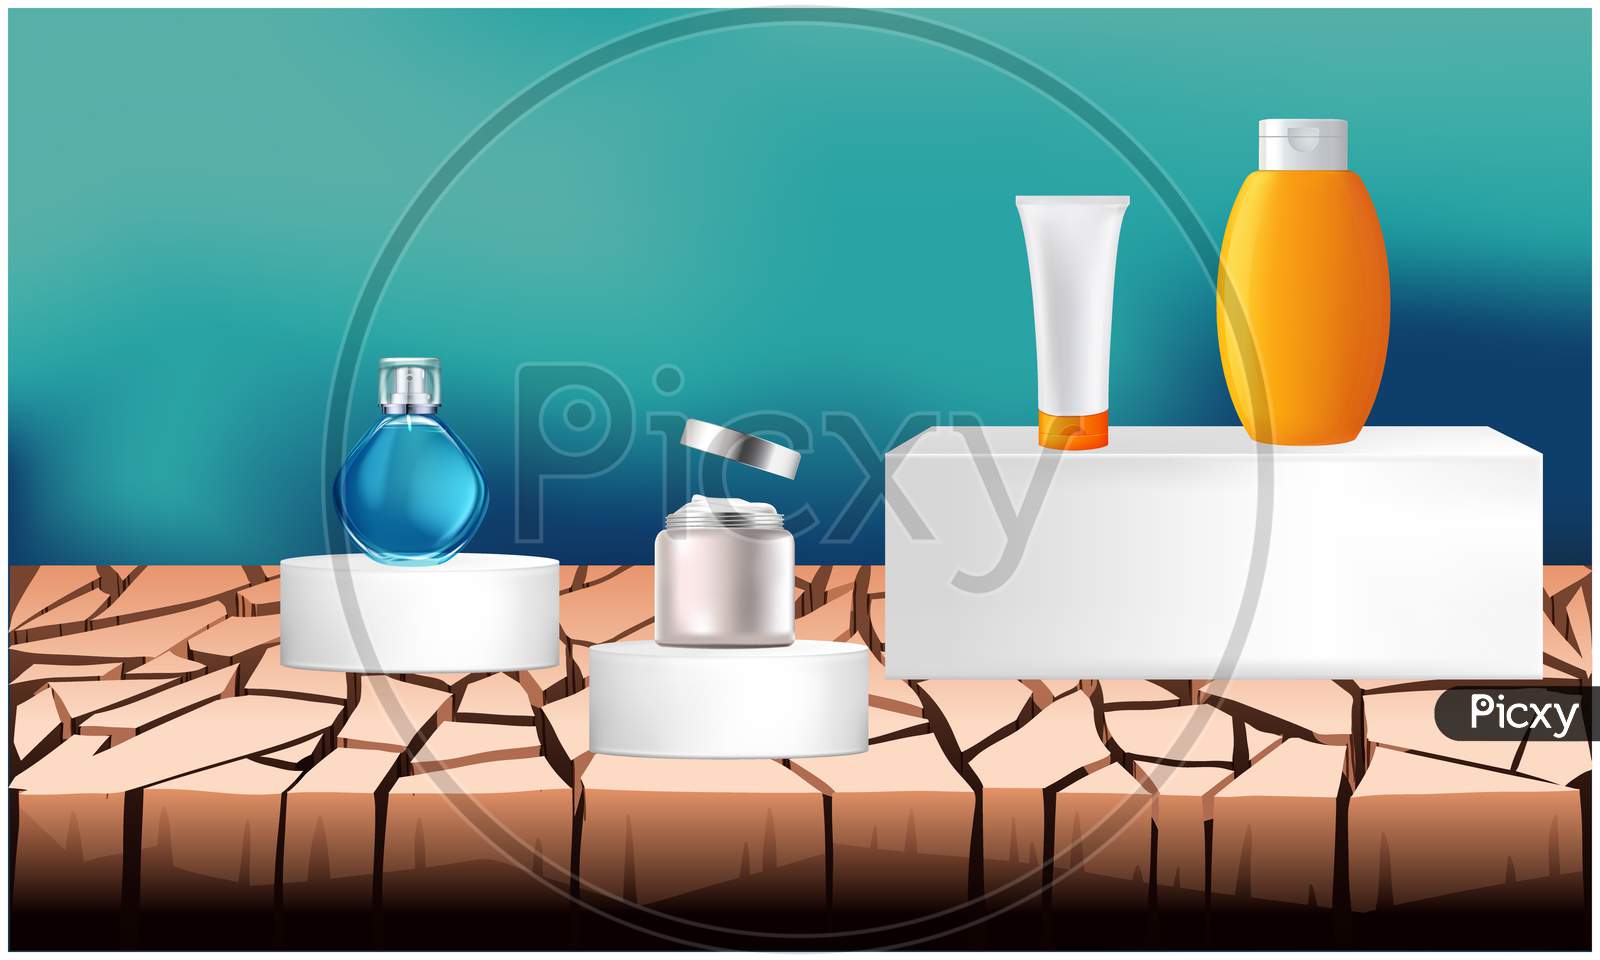 Mock Up Illustration Of Various Product On Abstract Background